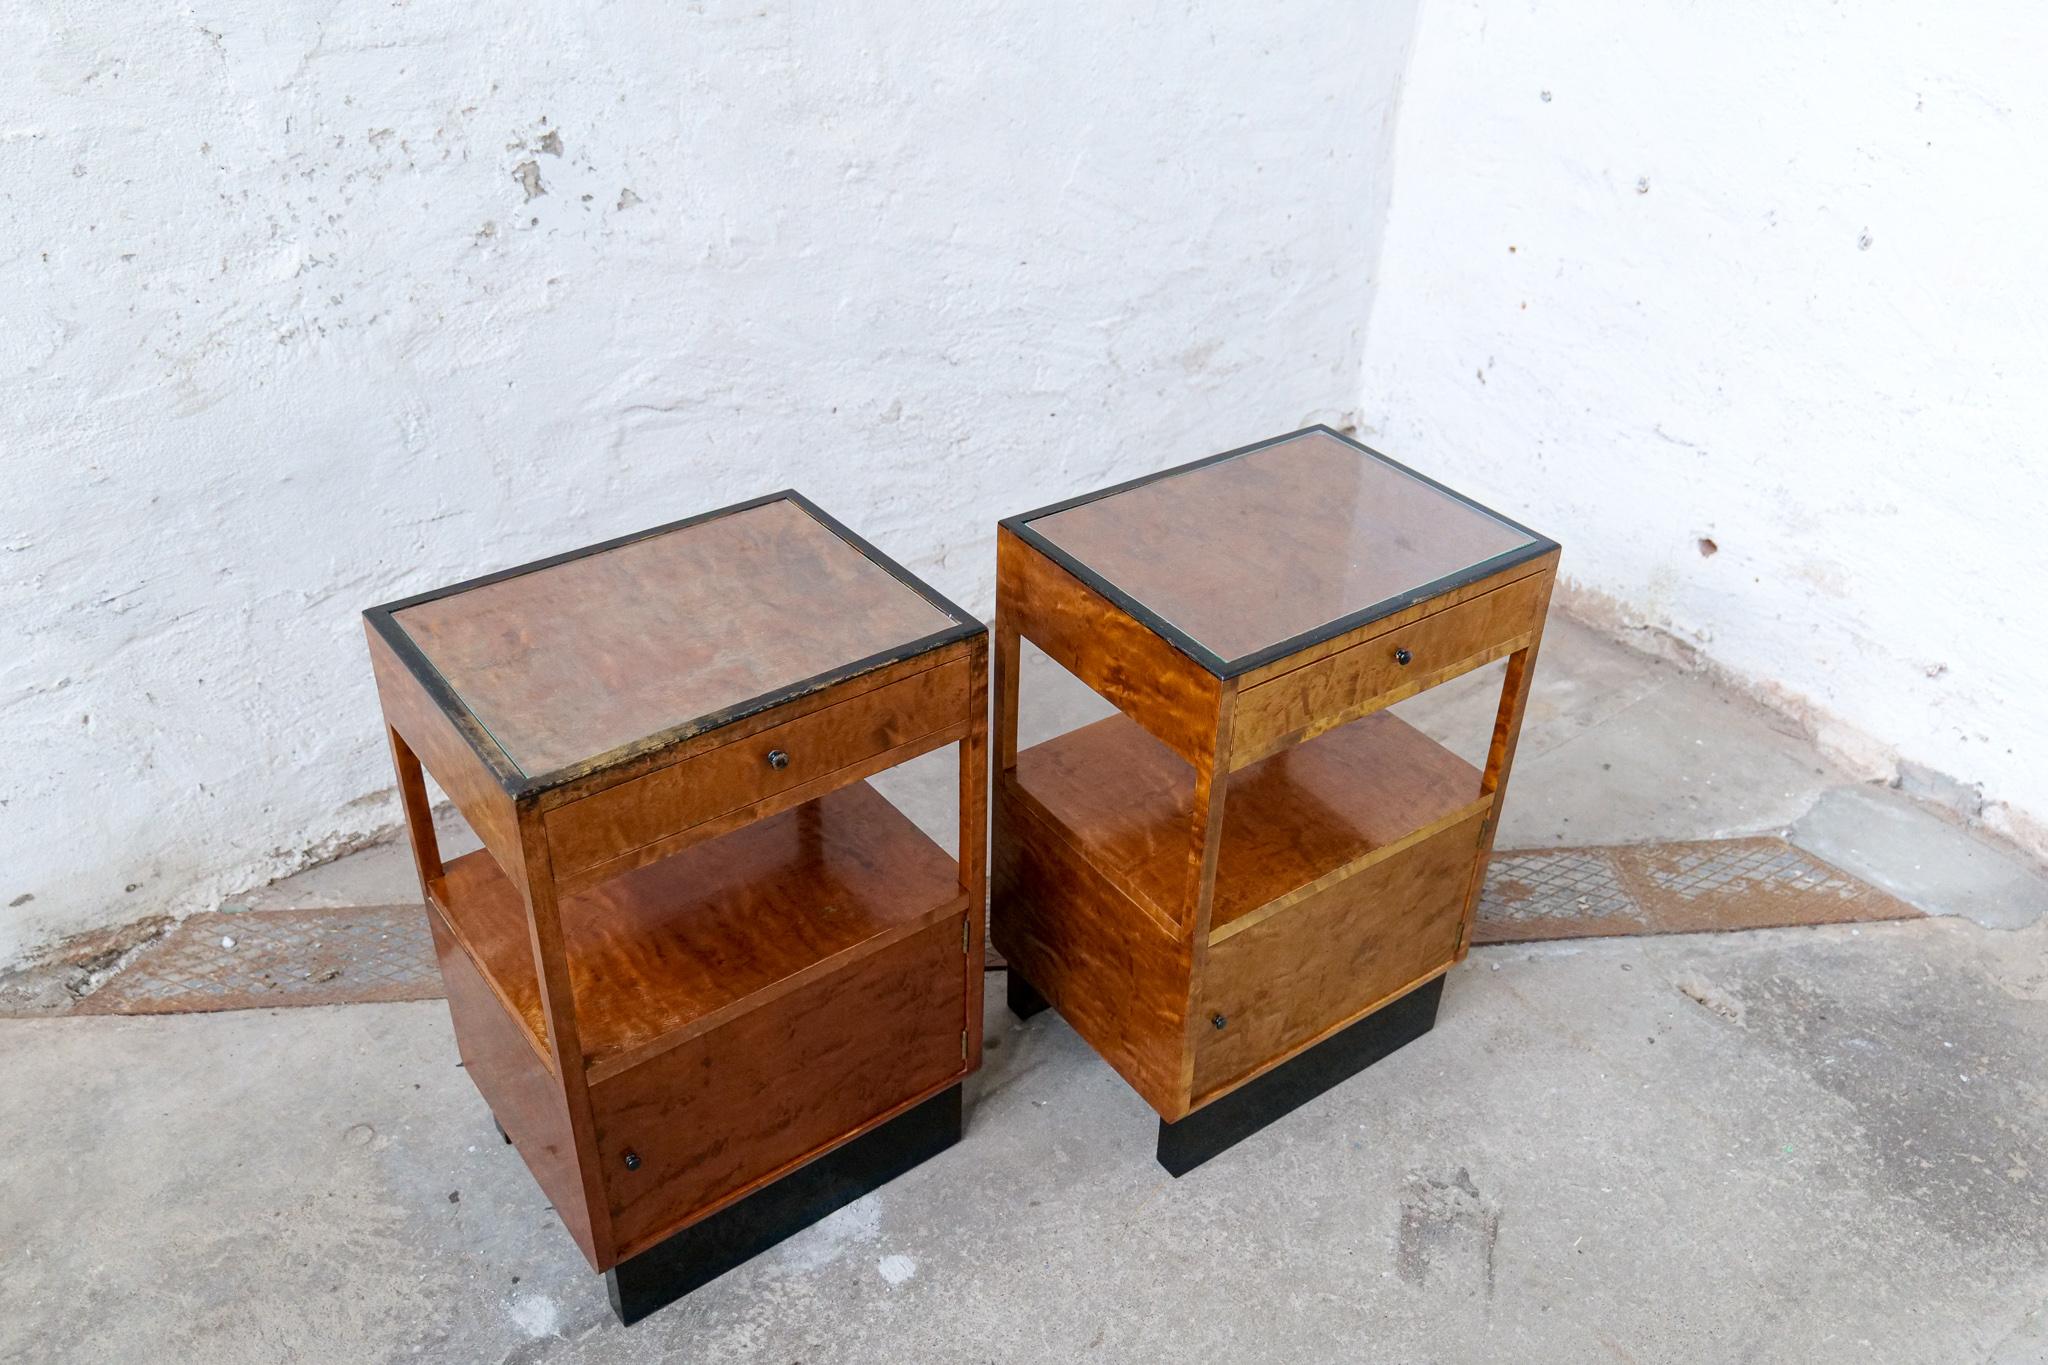 Birch Art Deco Pair of Side Tables Attributed to Carl Malmsten Sweden, 1930s